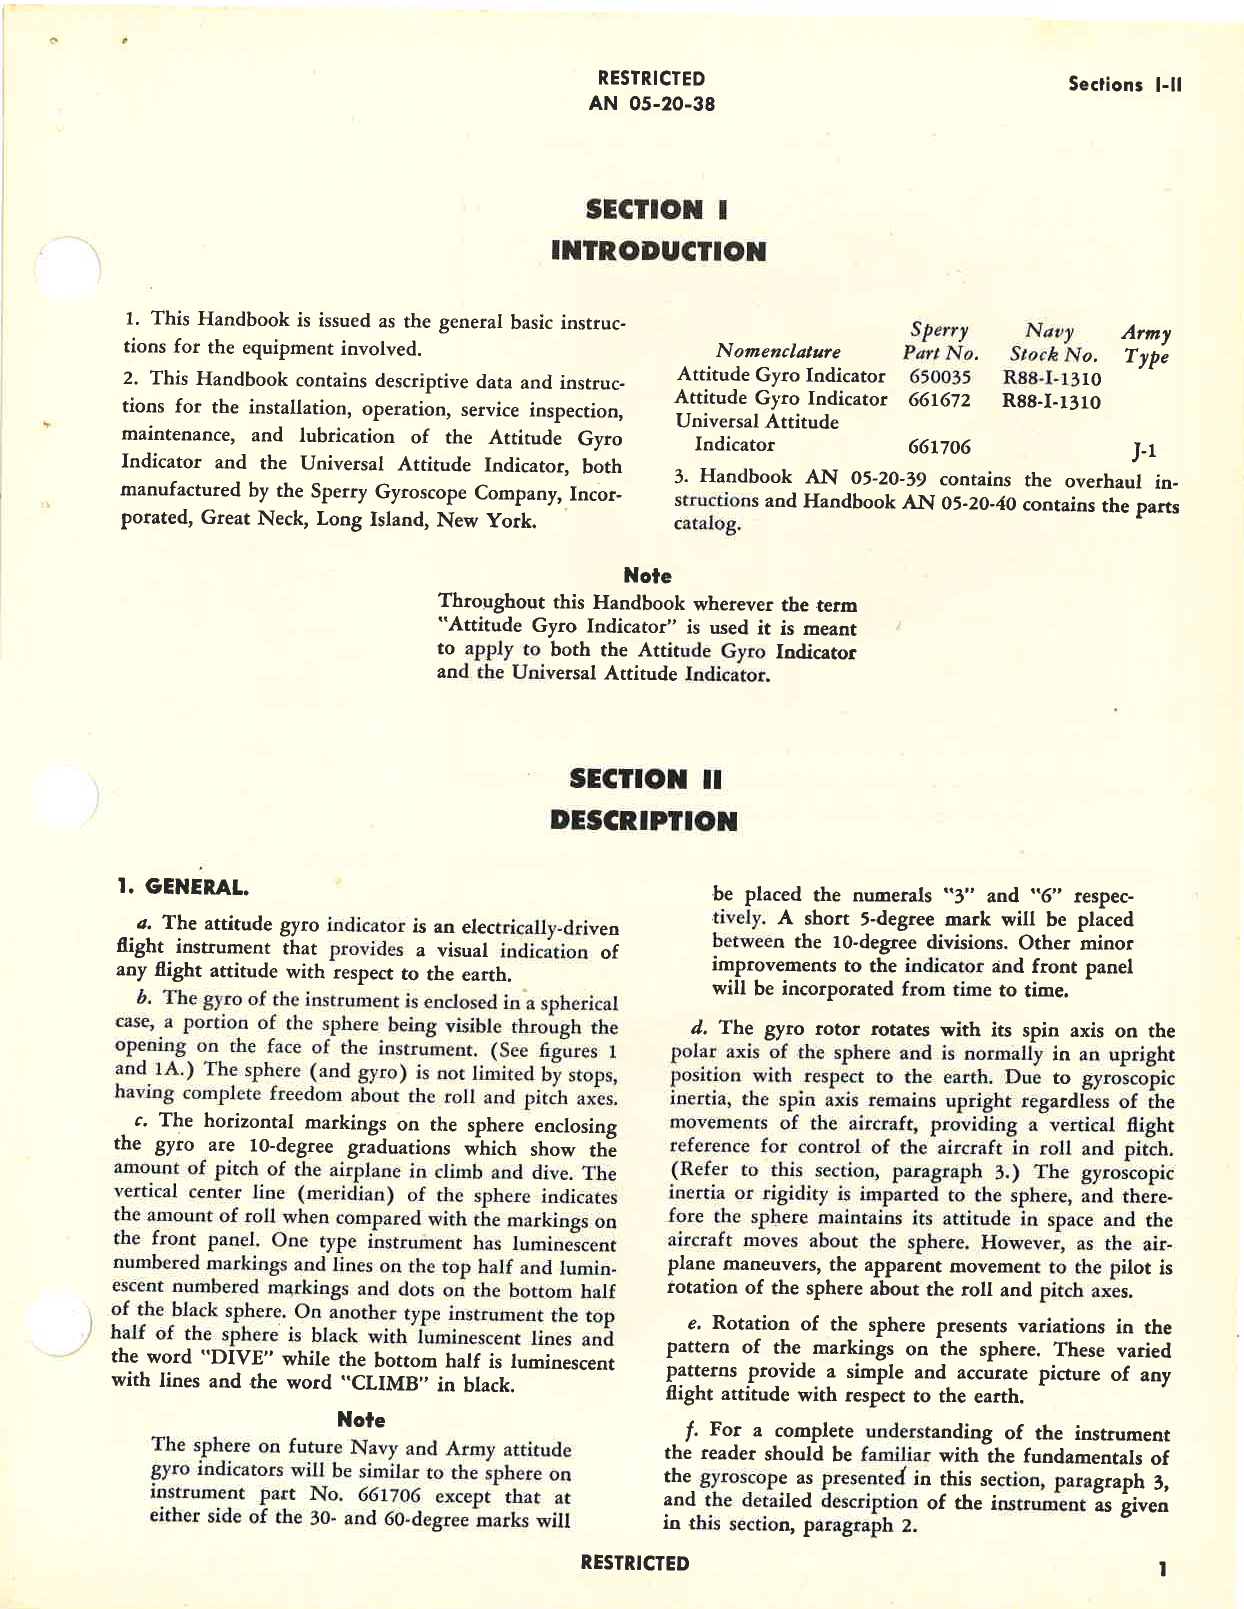 Sample page 5 from AirCorps Library document: Operation and Service Instructions for Attitude Gyro Indicator Navy R88-I-1310 and Universal Attitude Gyro Indicator Type J-1